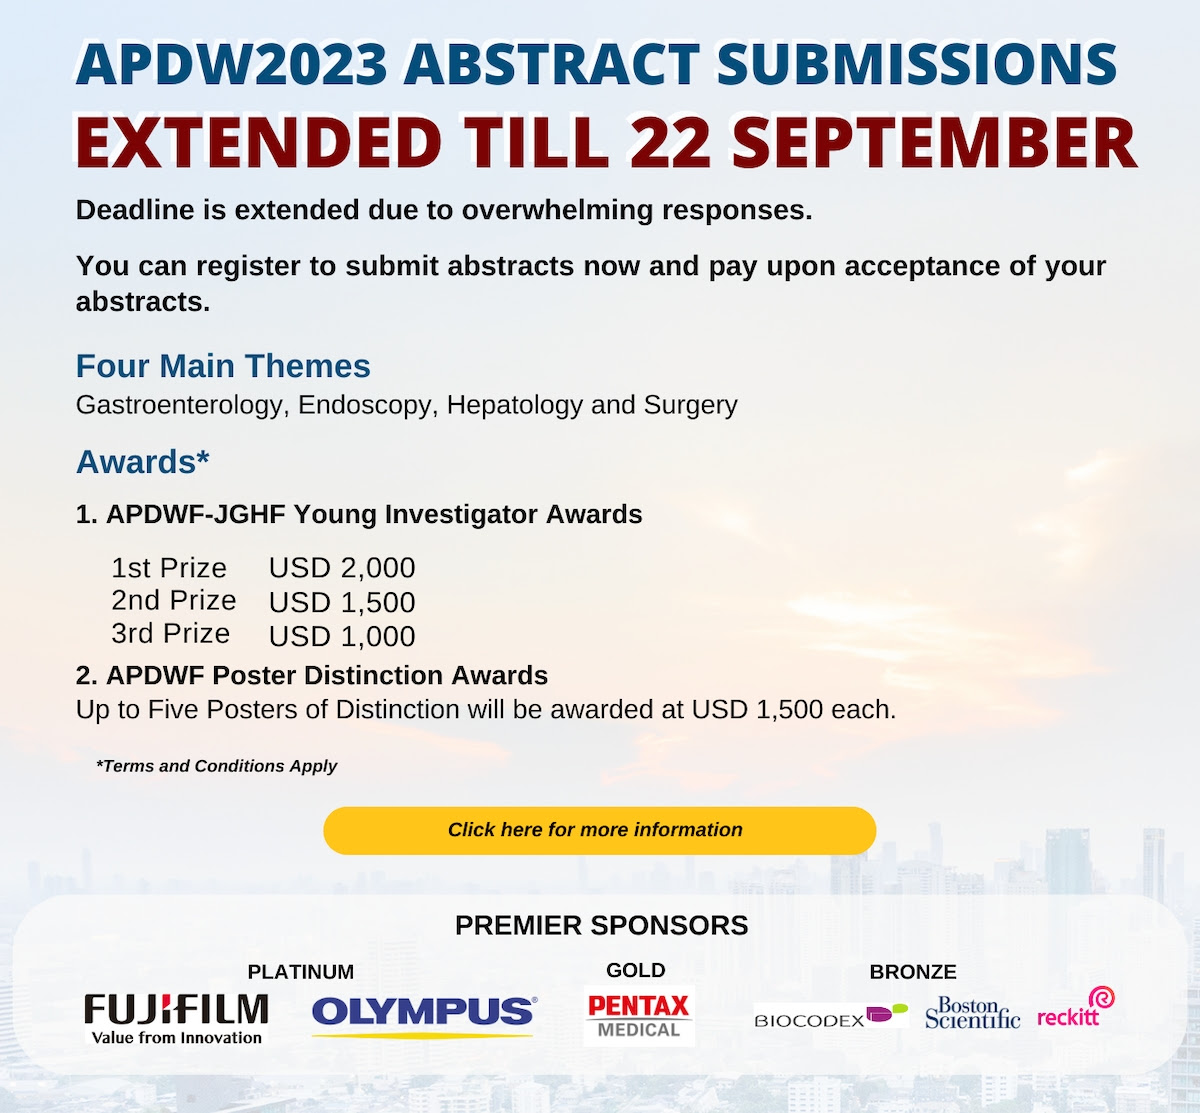 APDW 2023 - Extension of Abstract Submission Deadline | 22 Sep 23